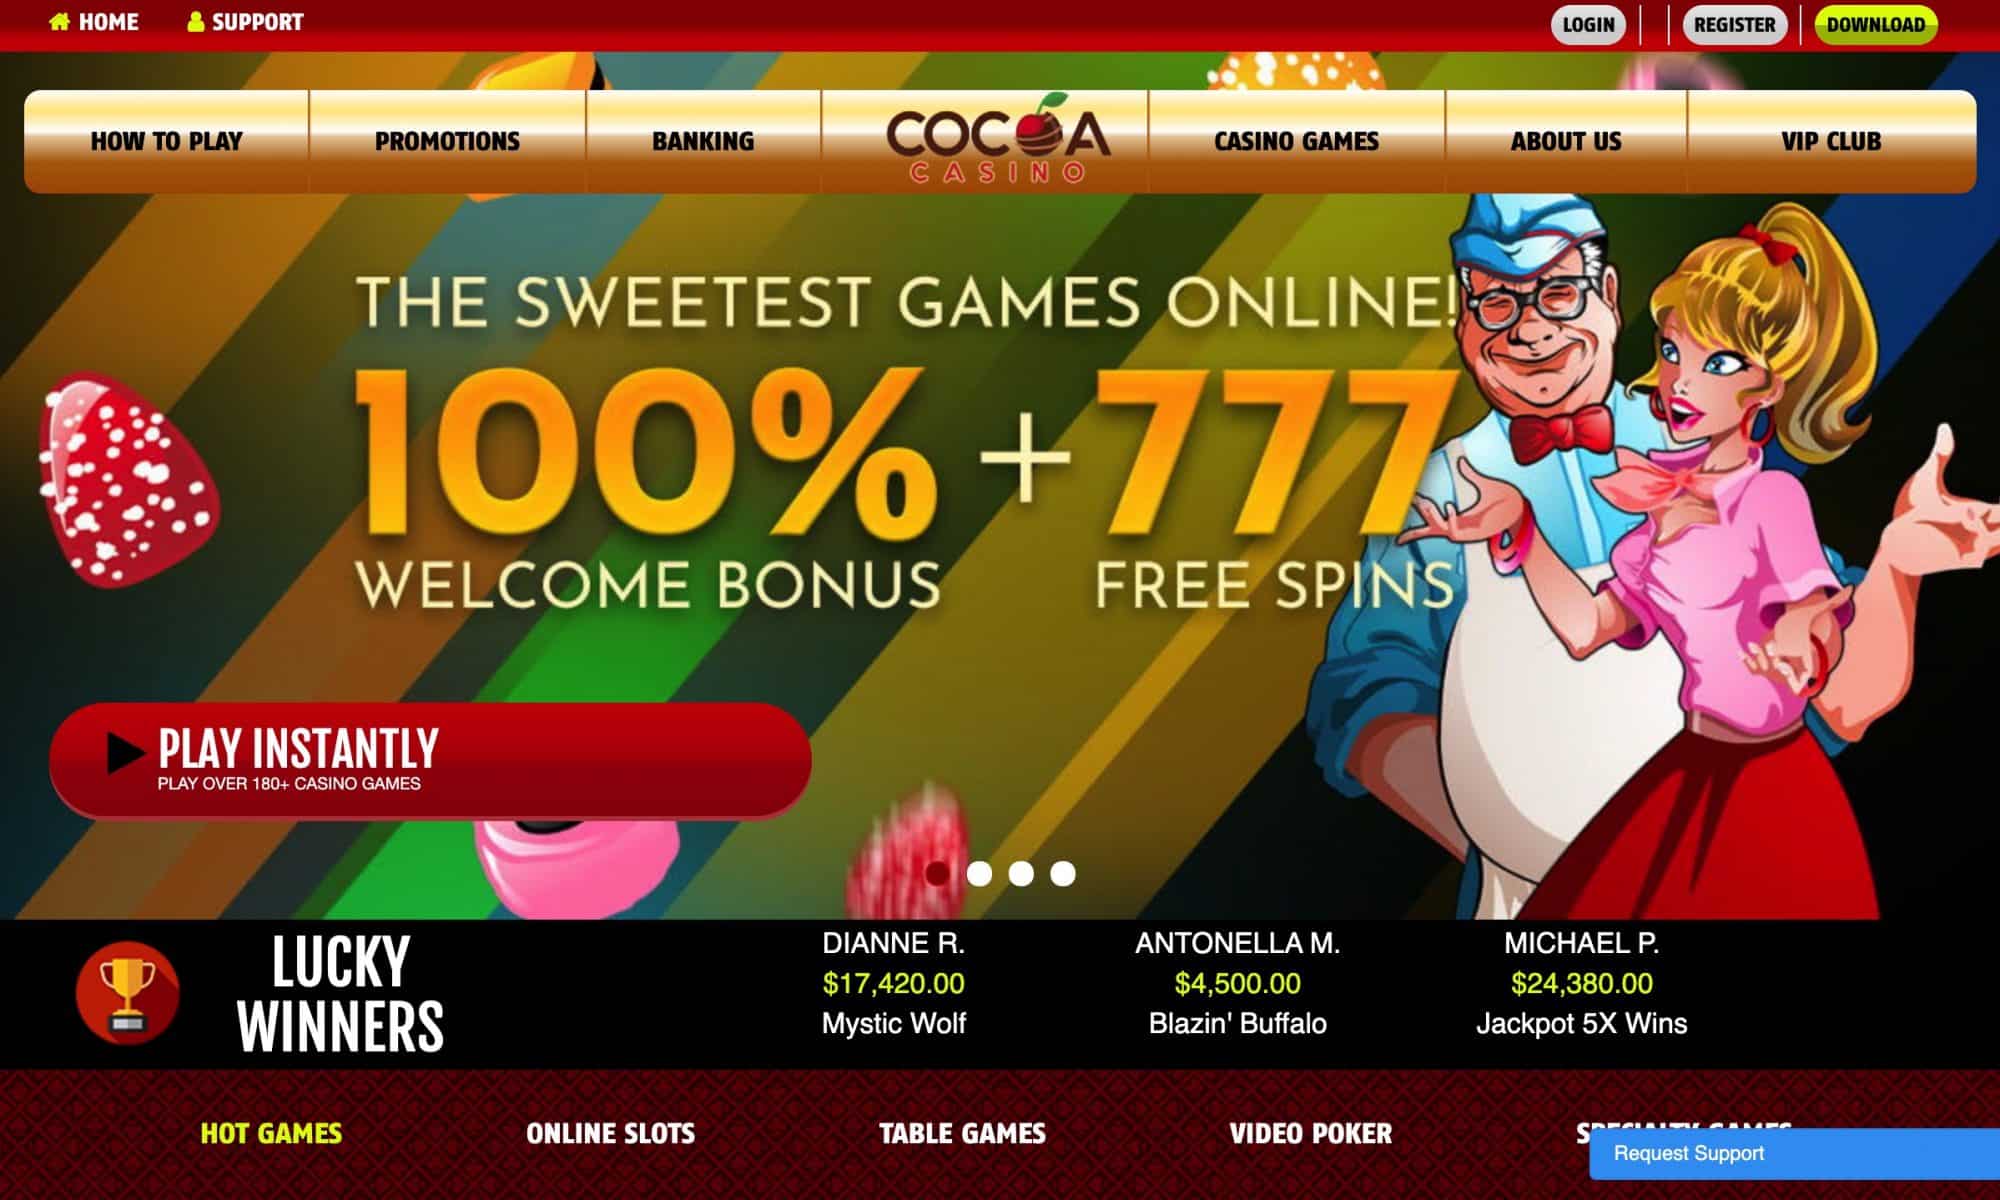 Cocoa Casino - claim 777 casino spins + 100% welcome offer